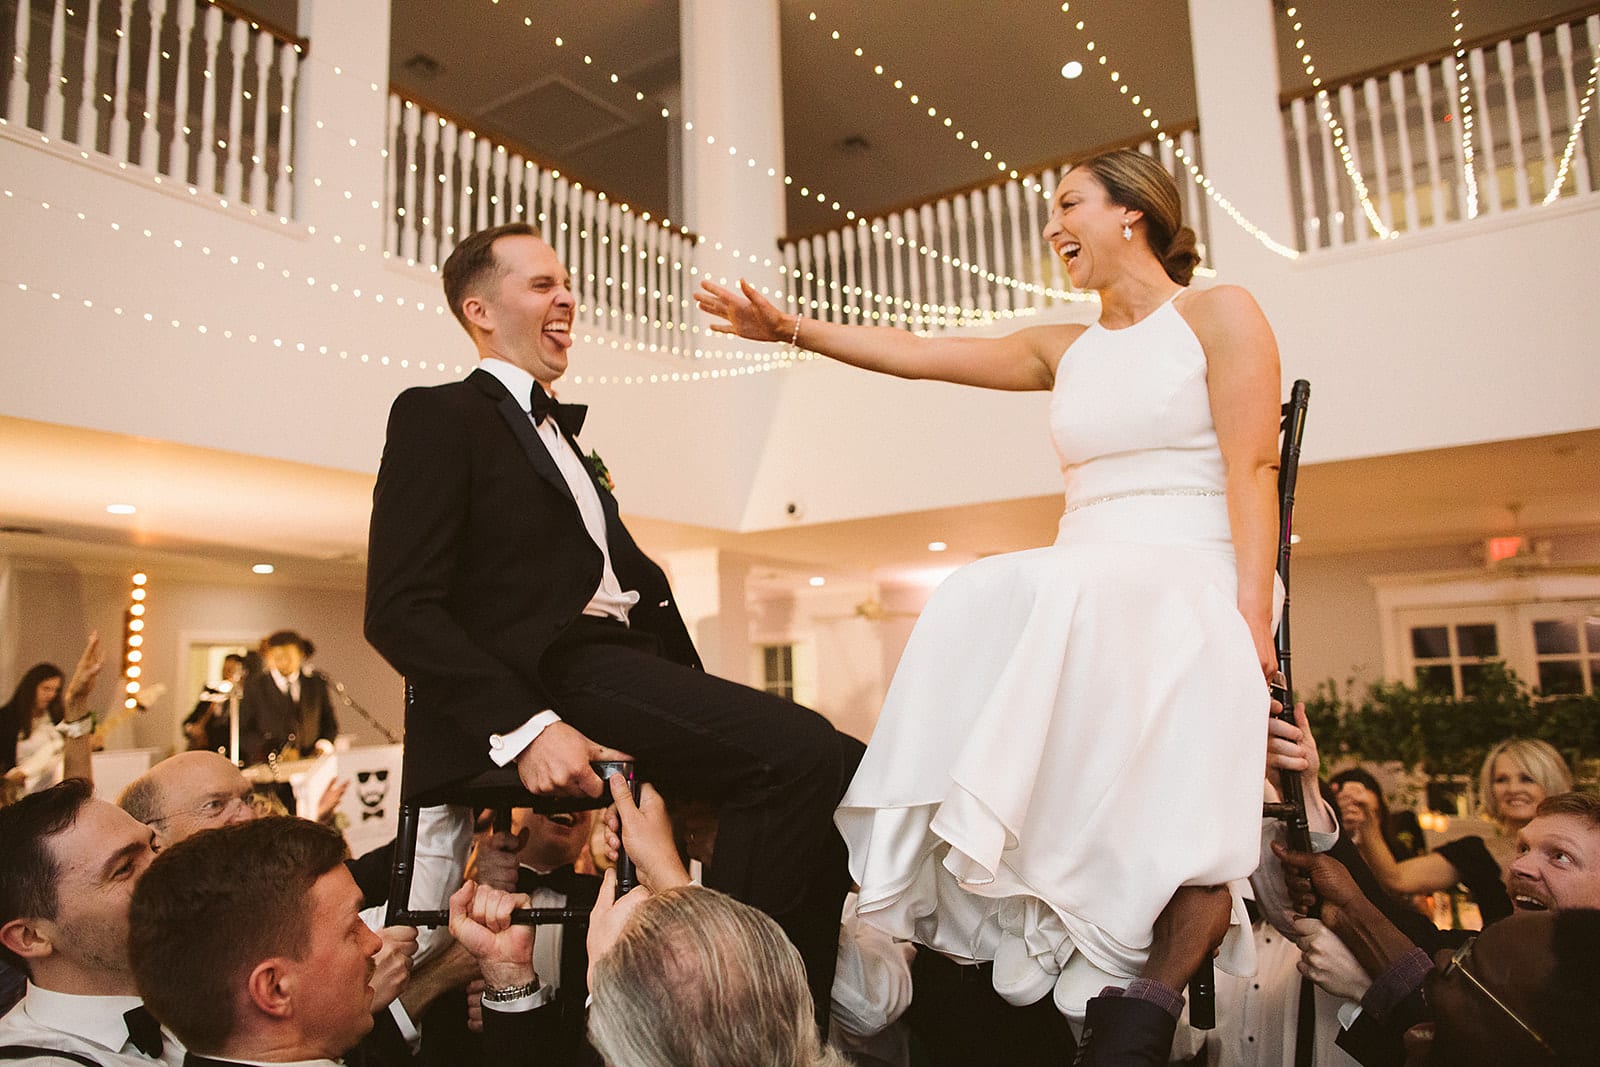 guests lifting bride and groom on chairs during the Jewish wedding tradition of dancing the hora